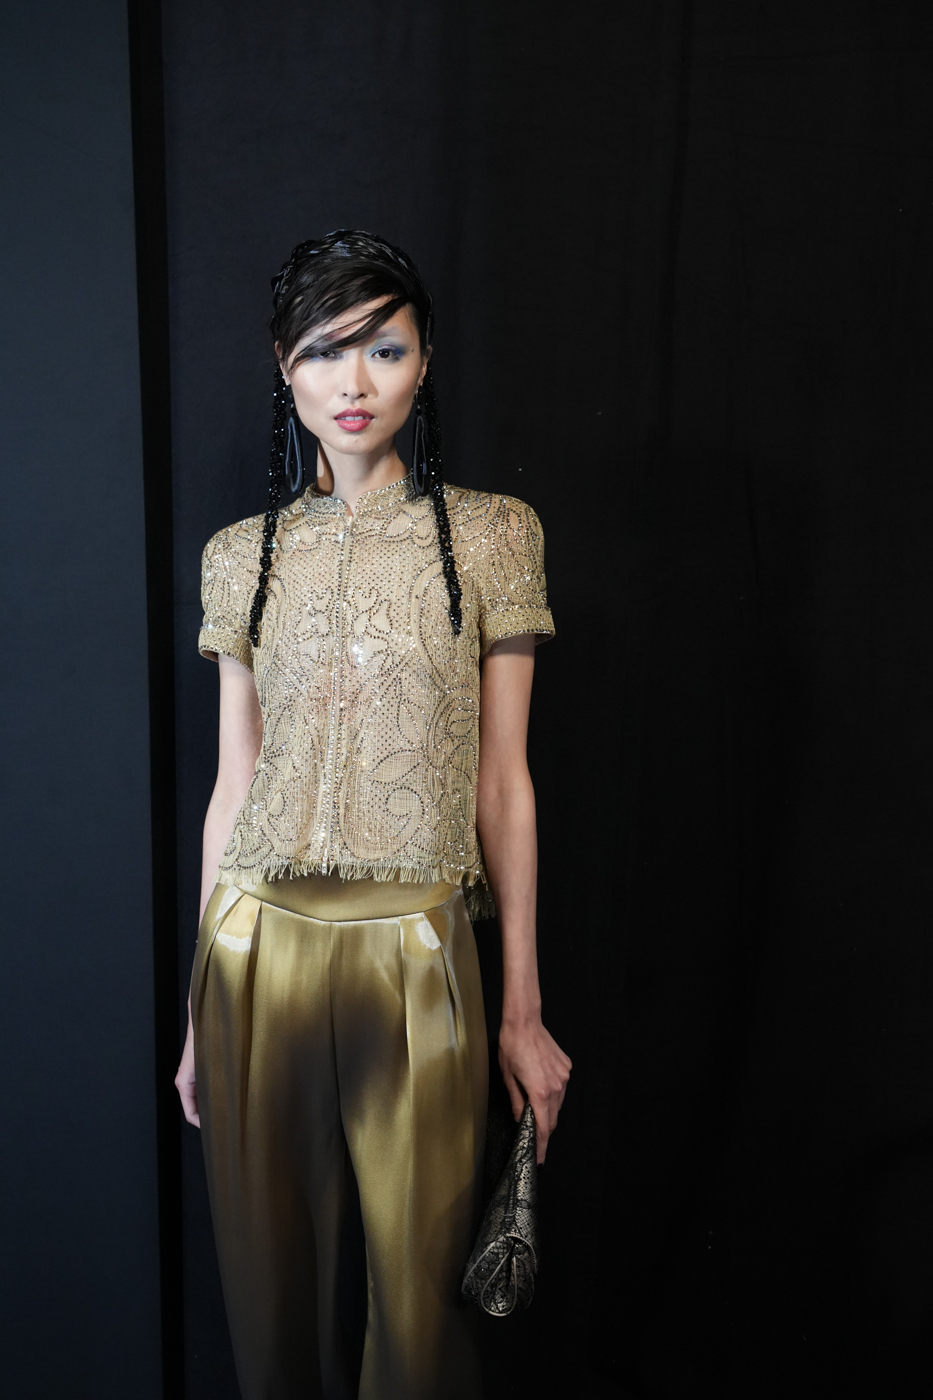 backstage photography by Marco Tassini during Armani Prive fashion show